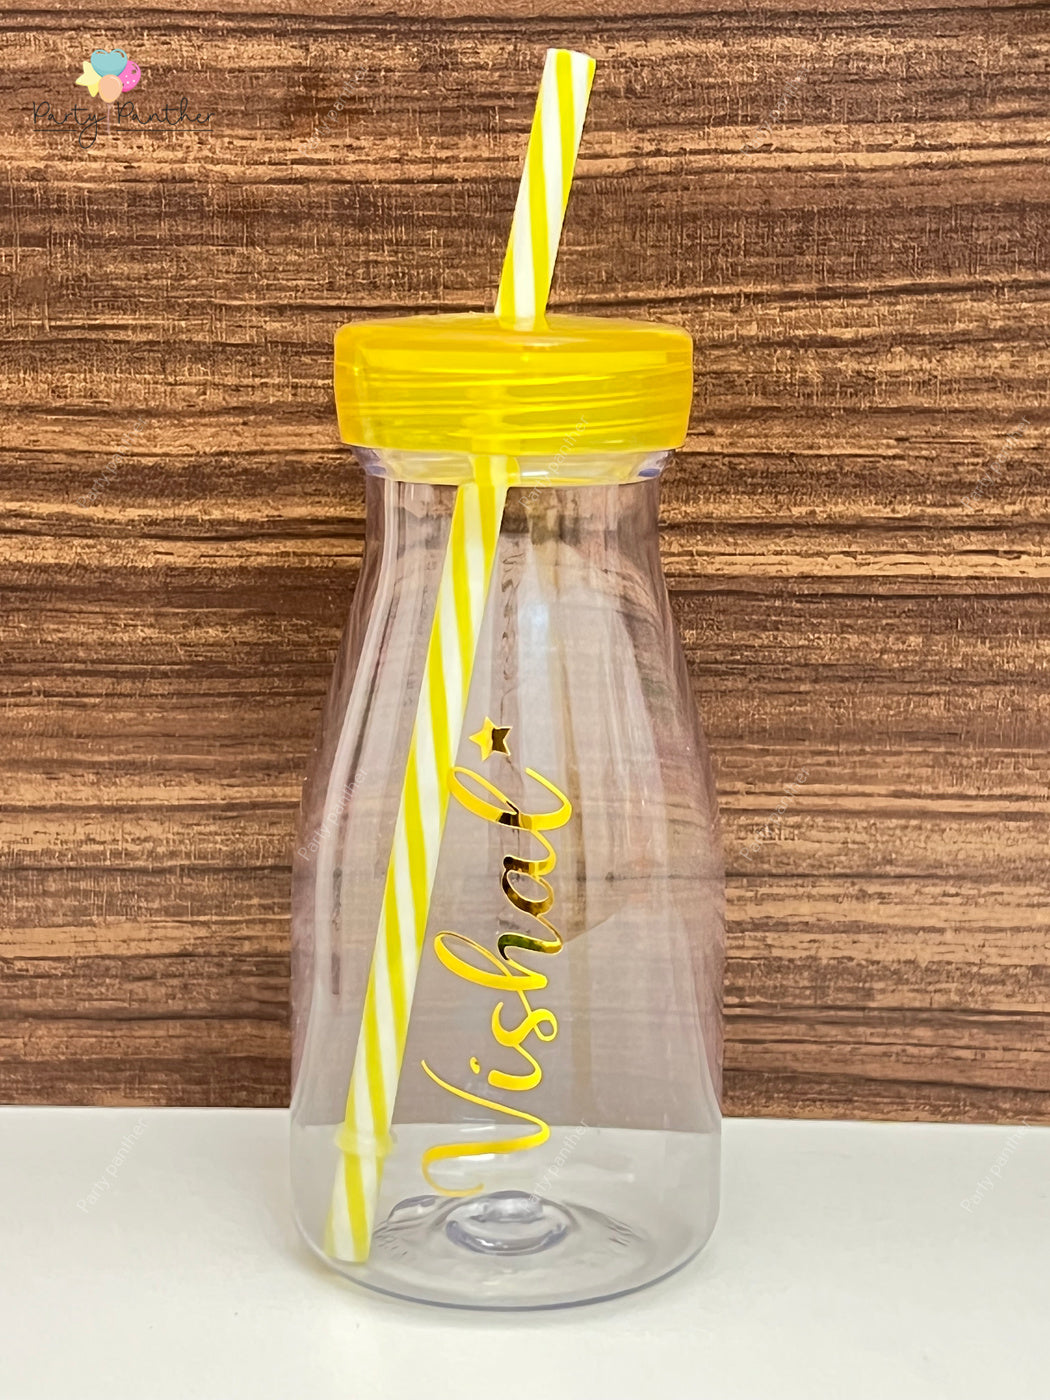 Personalised Milkshake Bottles as a party favor for unique return gifts